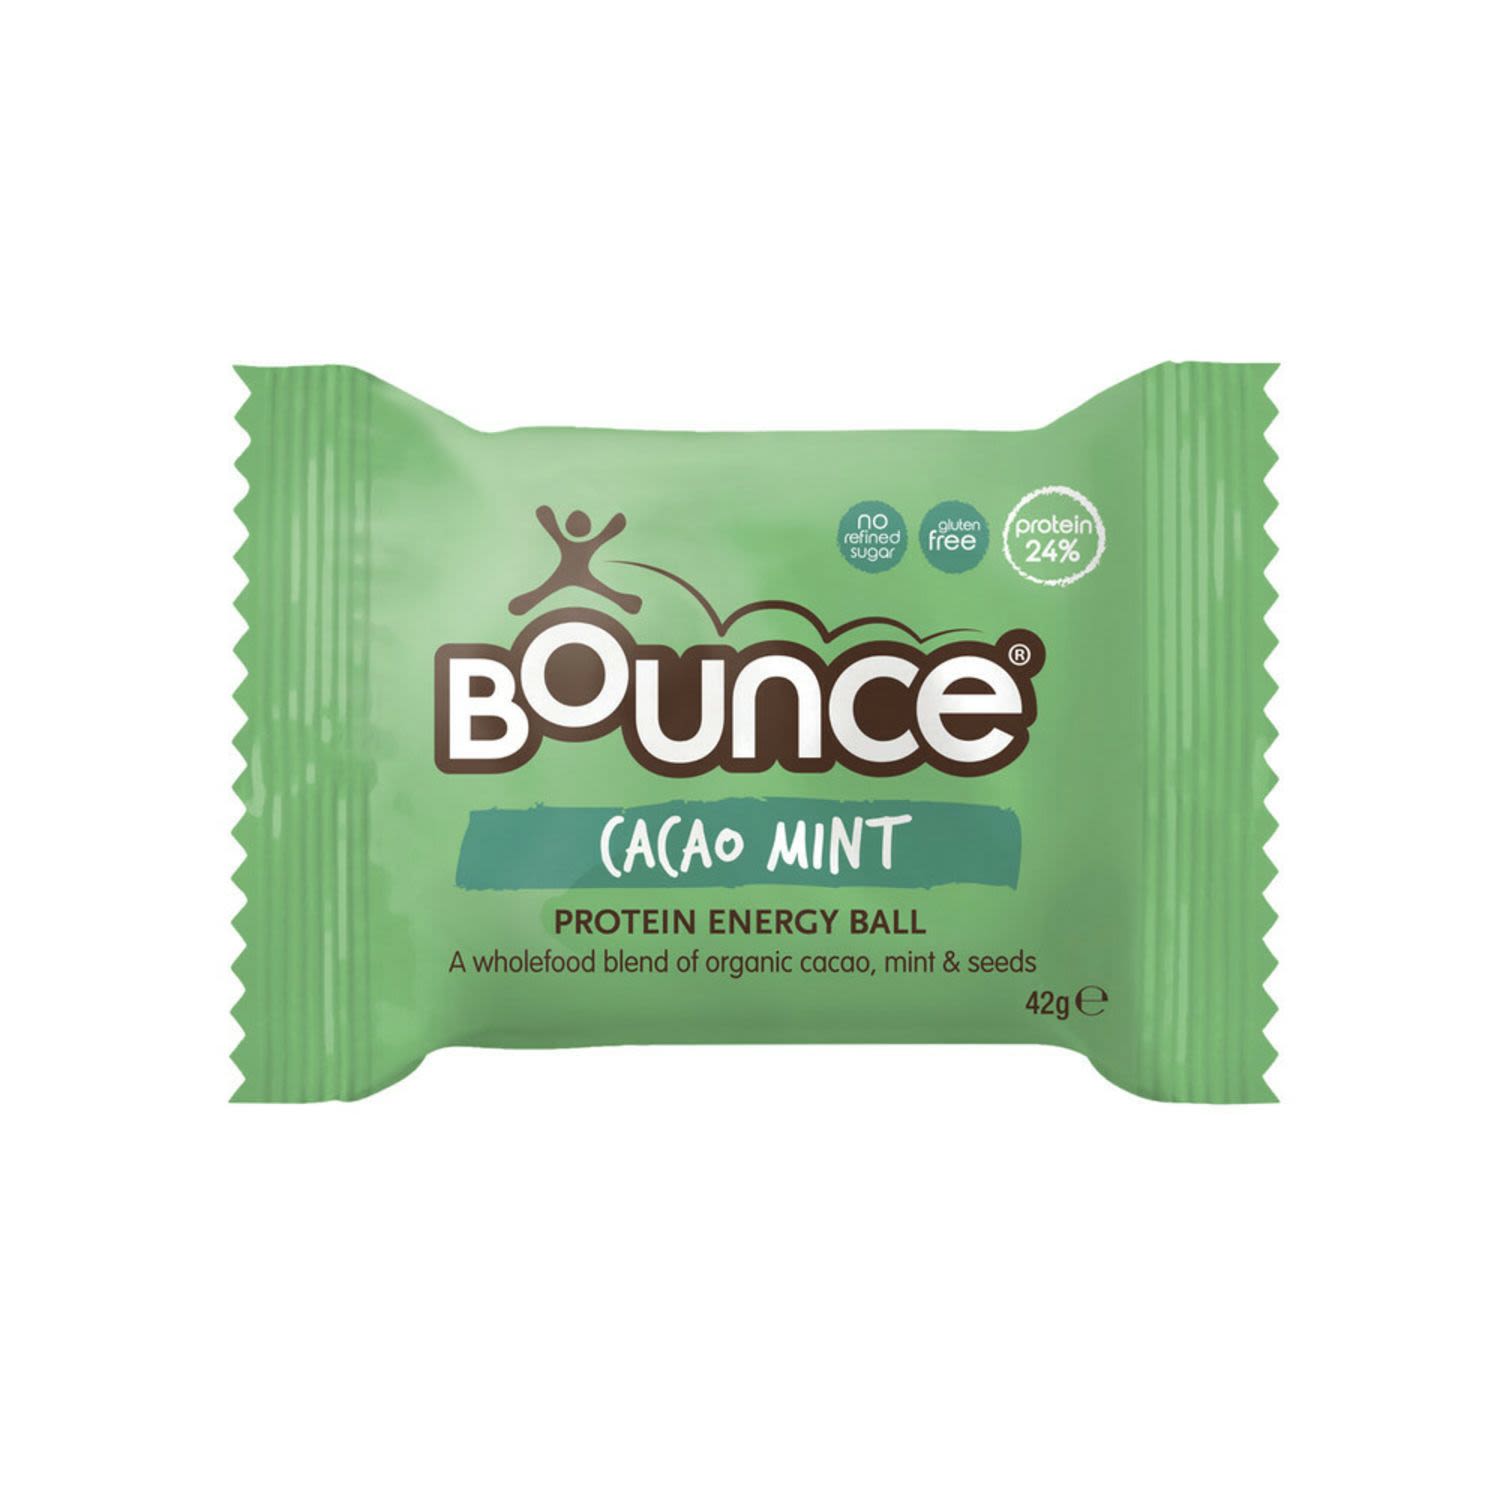 Bounce Cacao Mint Protein Energy Ball, 42 Gram